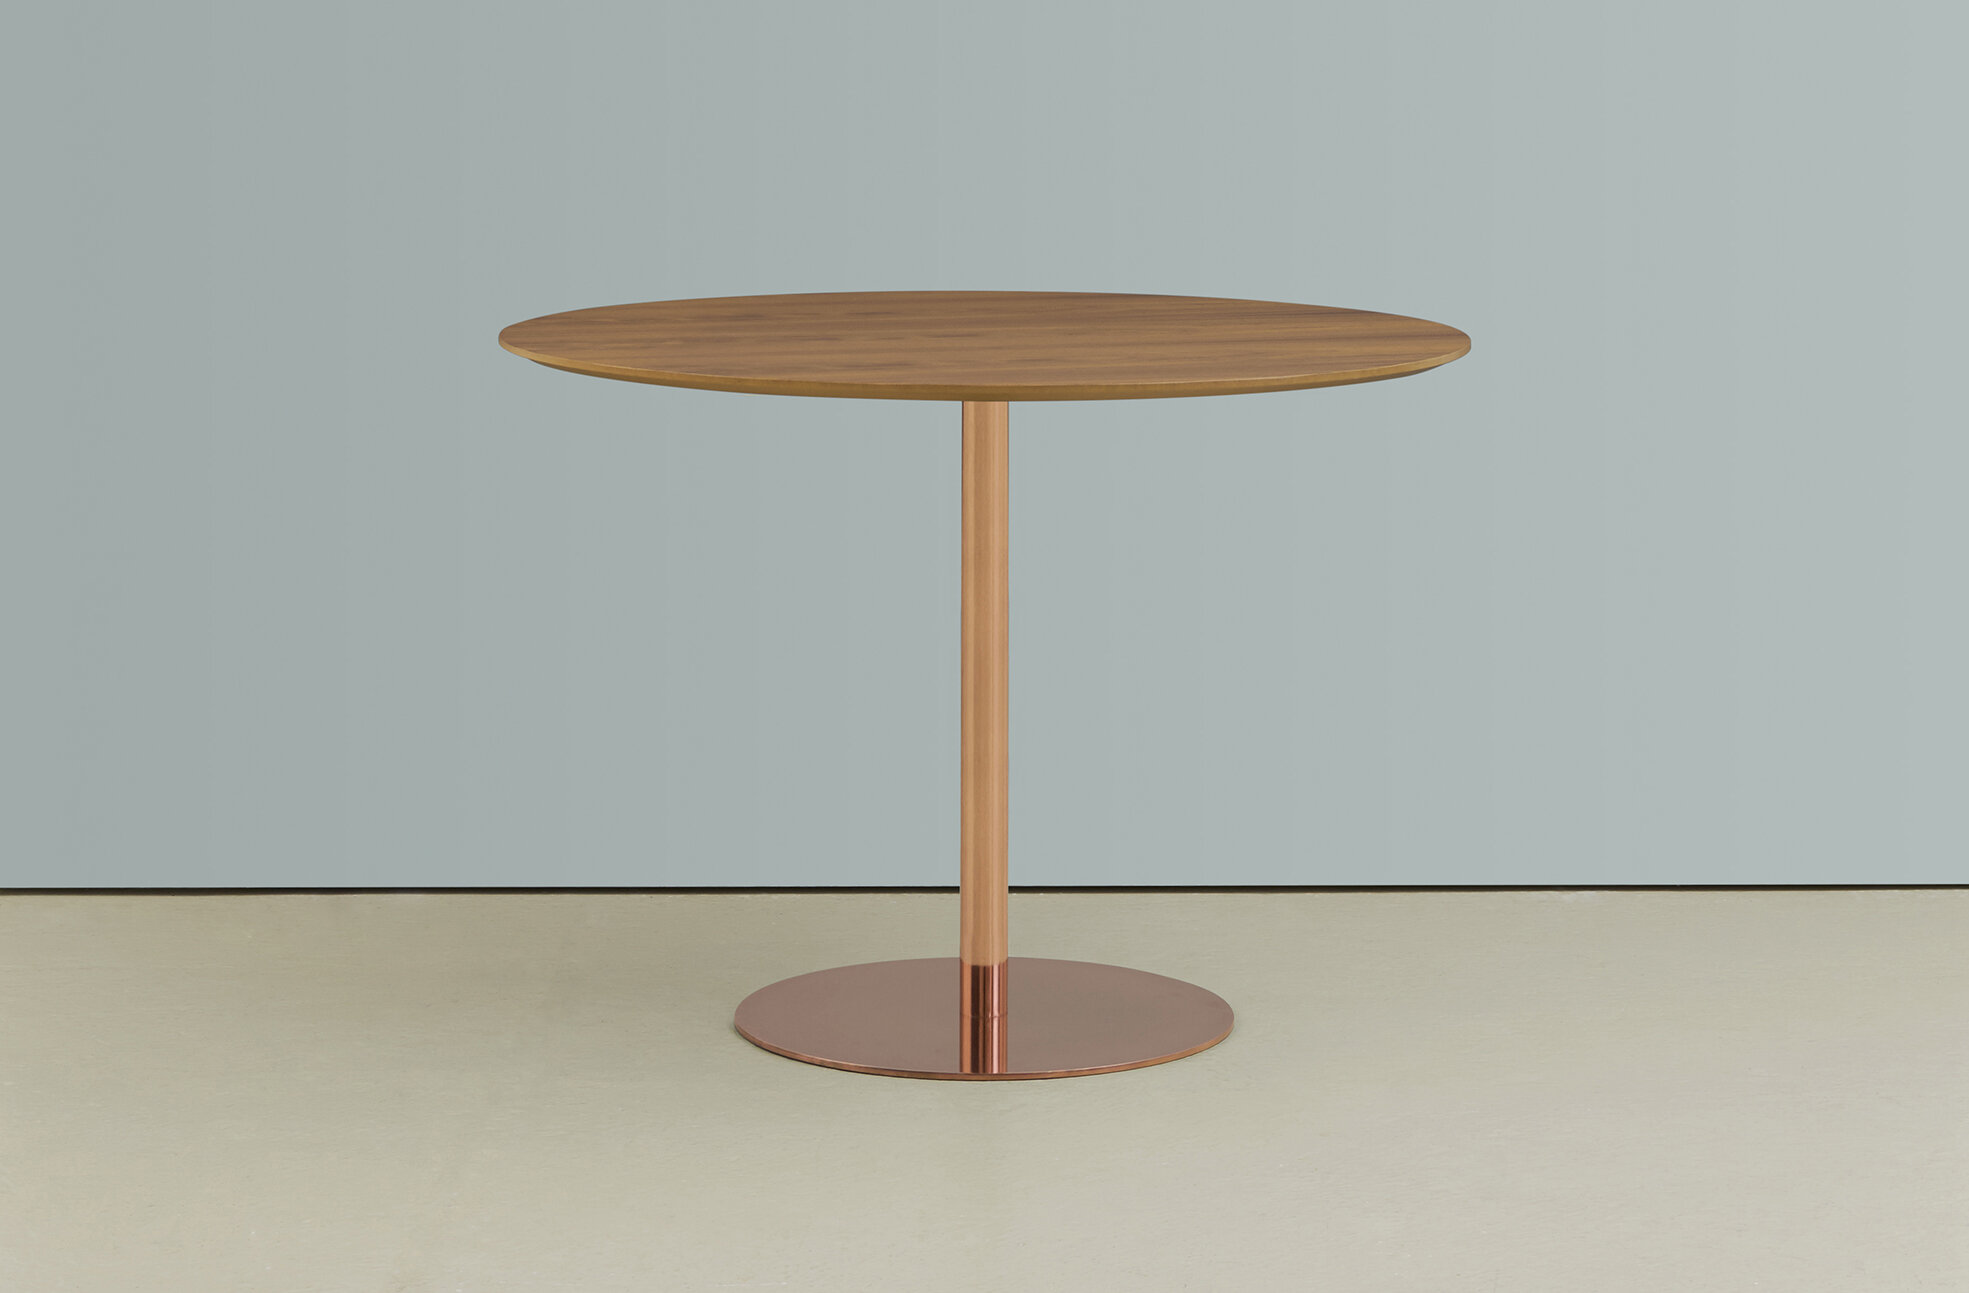 hm20s (polished copper base, walnut top) (1) (low res).jpg